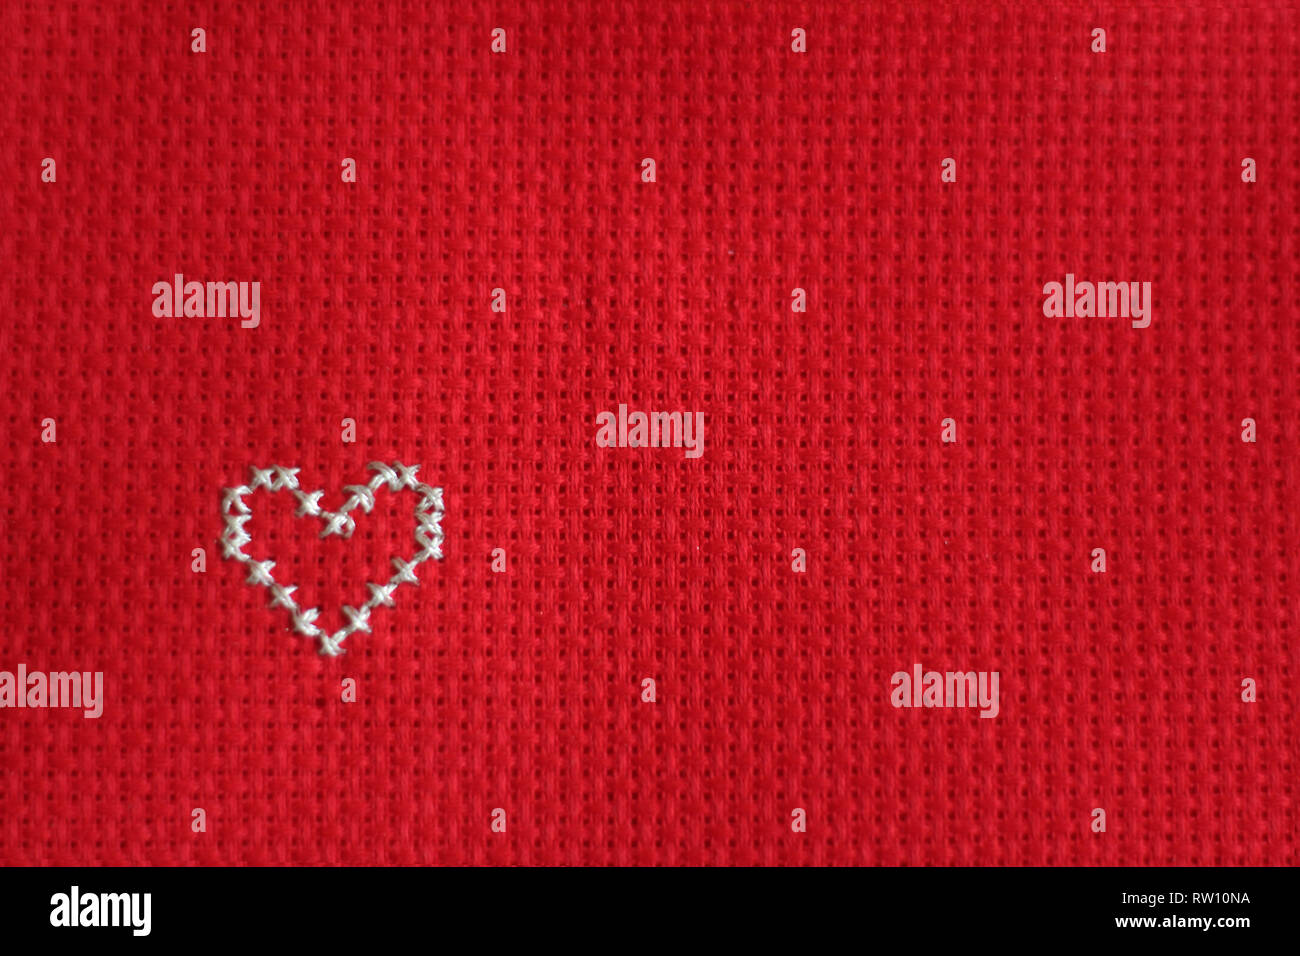 Cross stitched silver heart, red background. free copy space Stock Photo